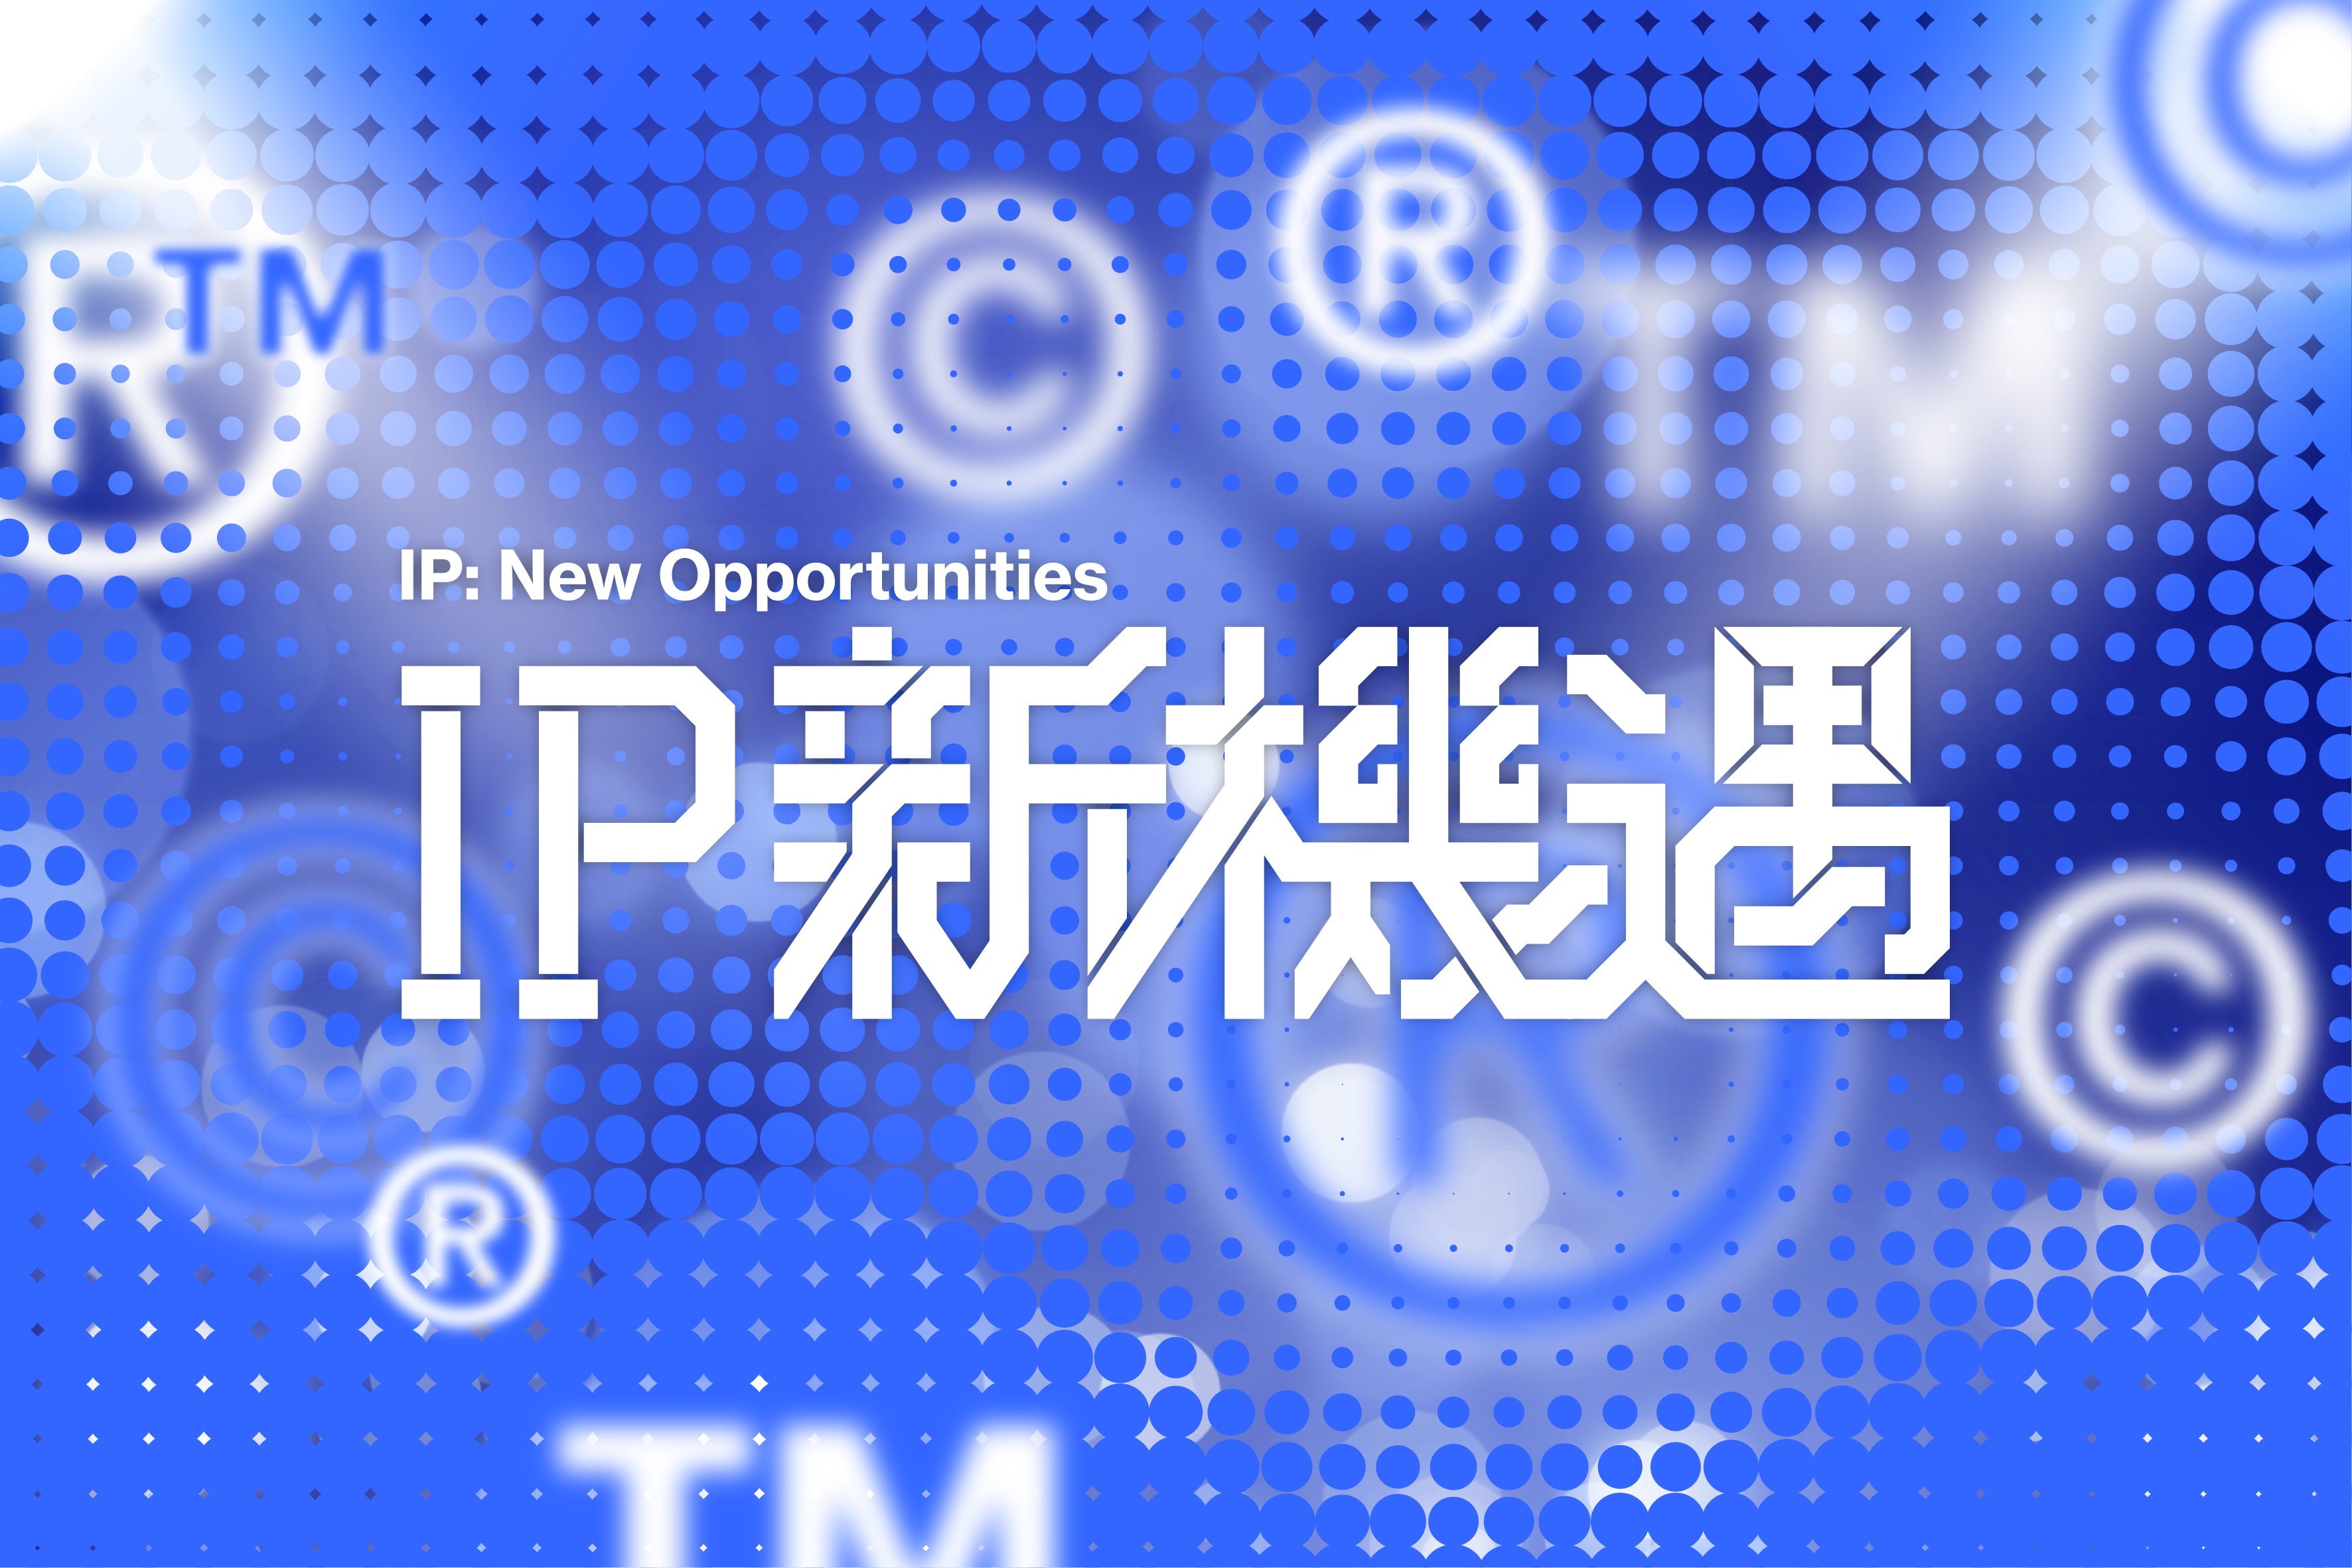 Special Television Series - IP • New Opportunities